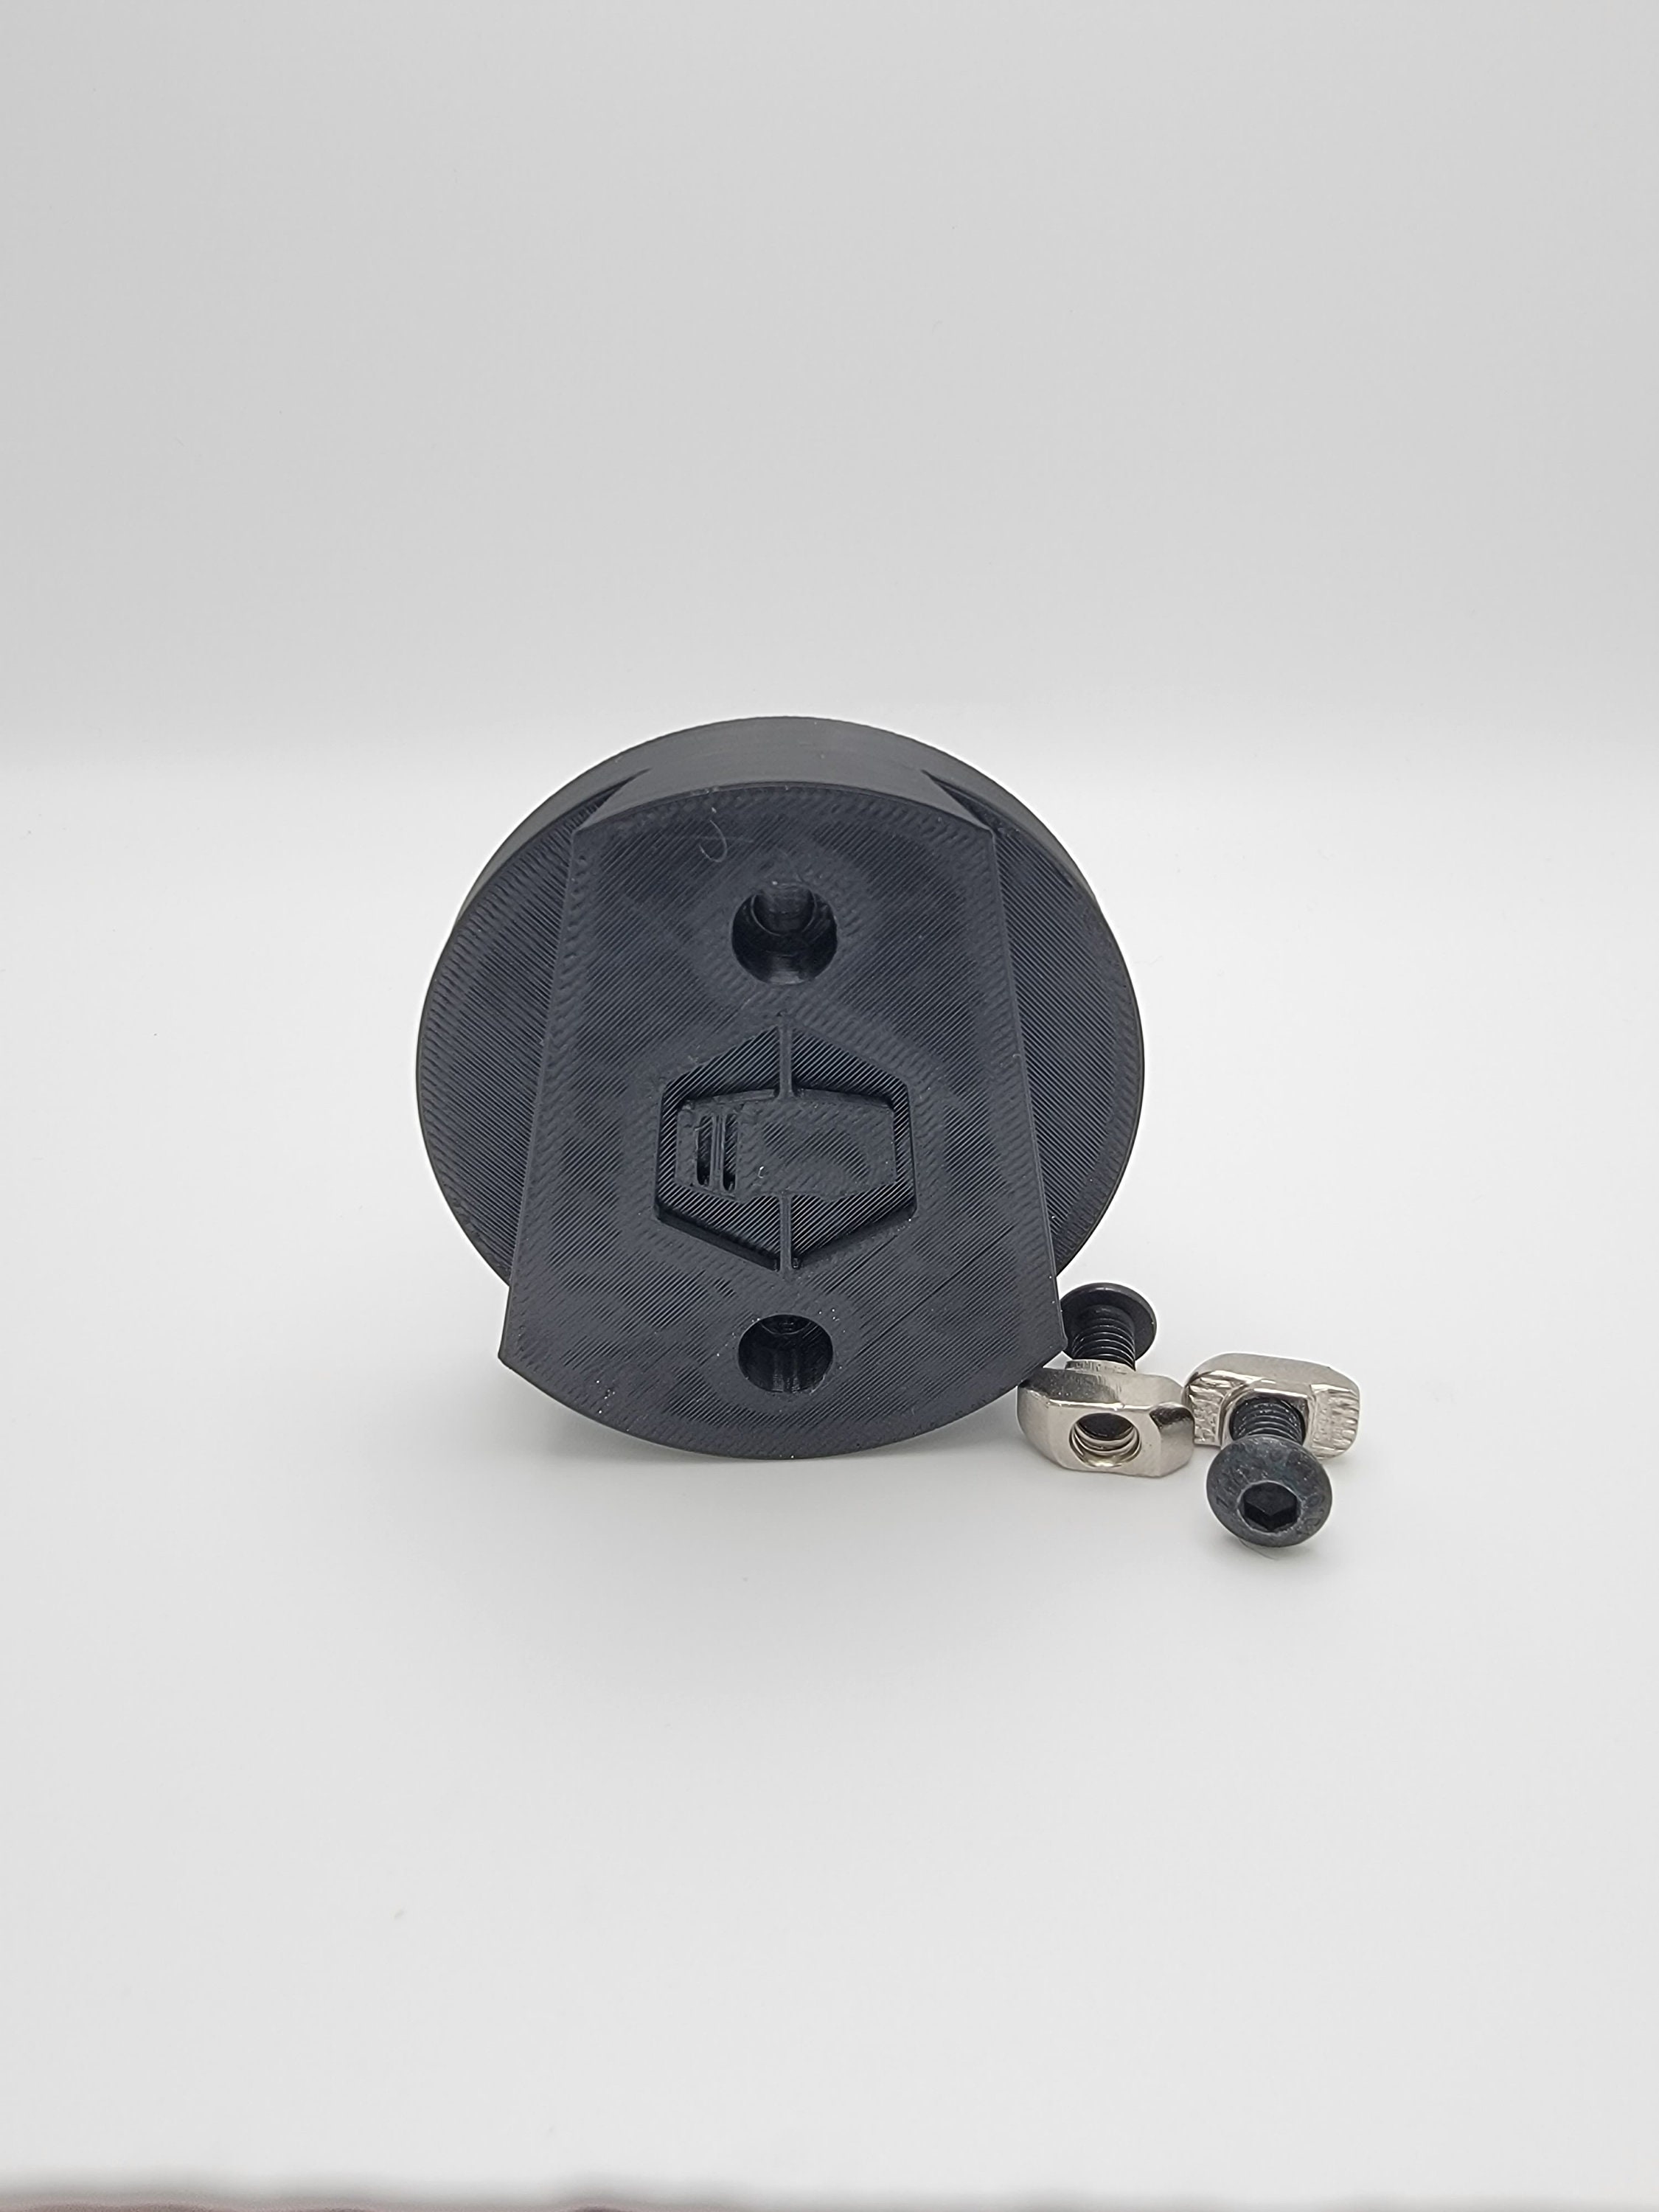 QRMax Fanatec CSL DD Quick Release Plate [QRMaxFanCSLDD] : QR4rigs, Quick  Release Mounts for Sim Rigs, Change your rig in seconds, spend more time in  the game!